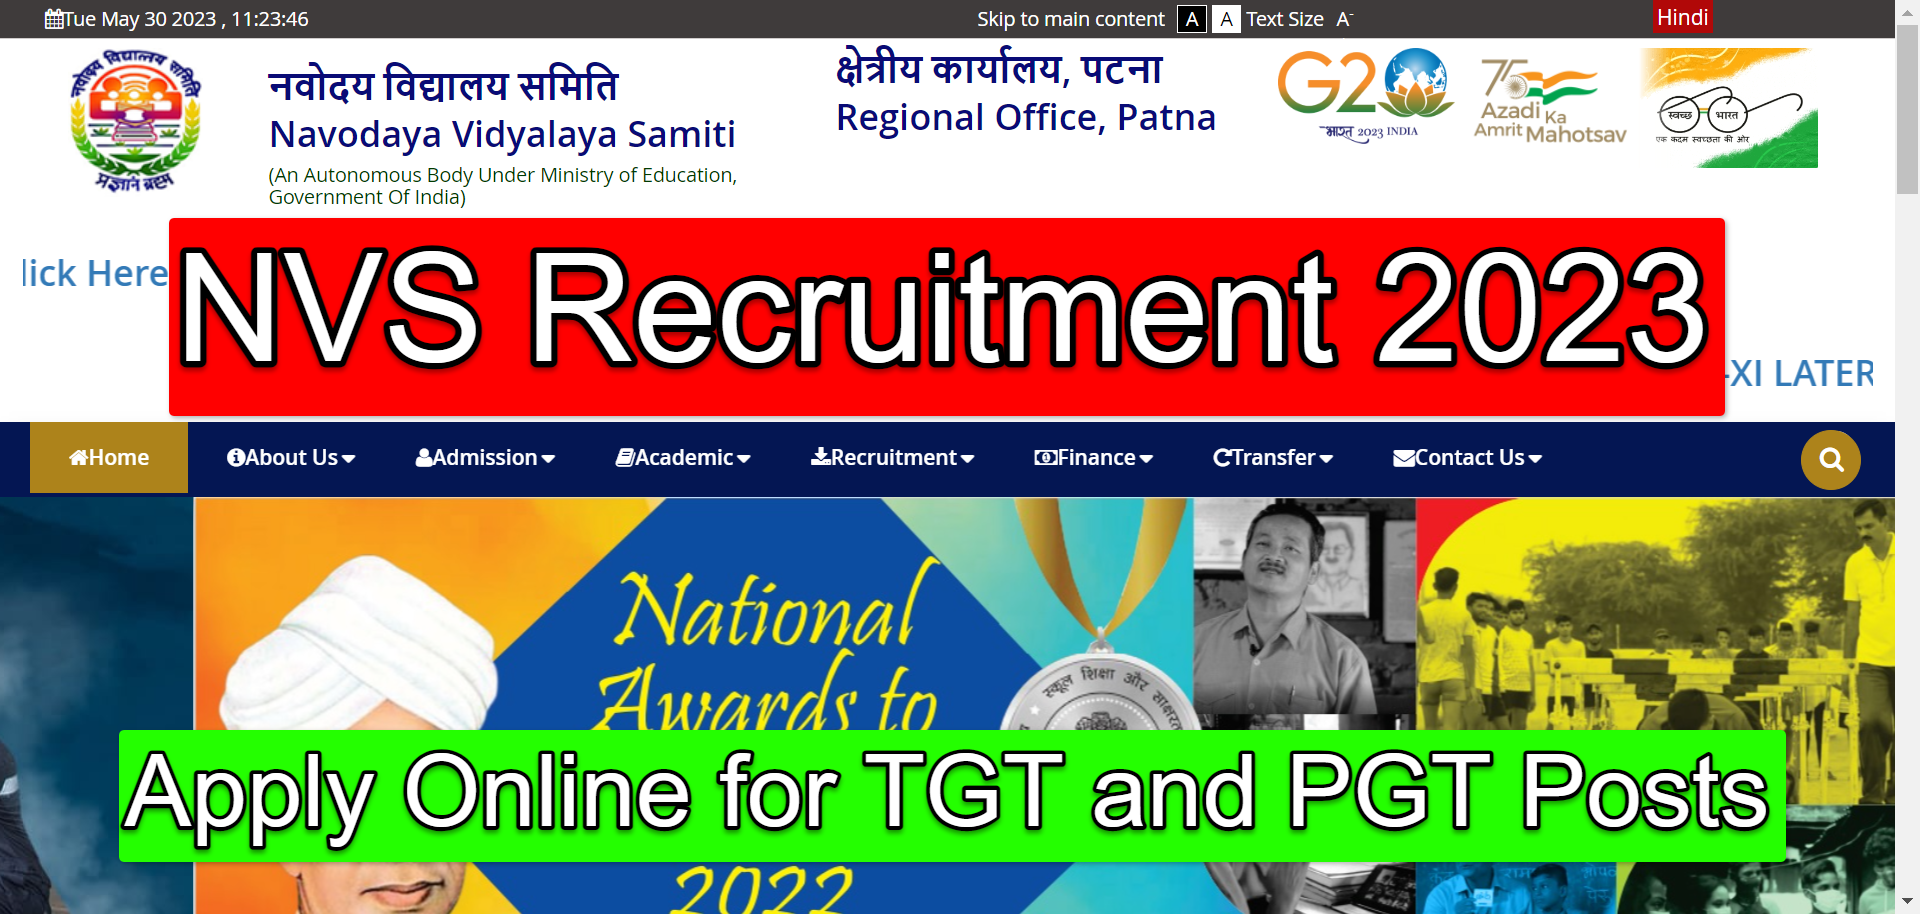 NVS Recruitment 2023 | Apply Online for TGT and PGT Posts